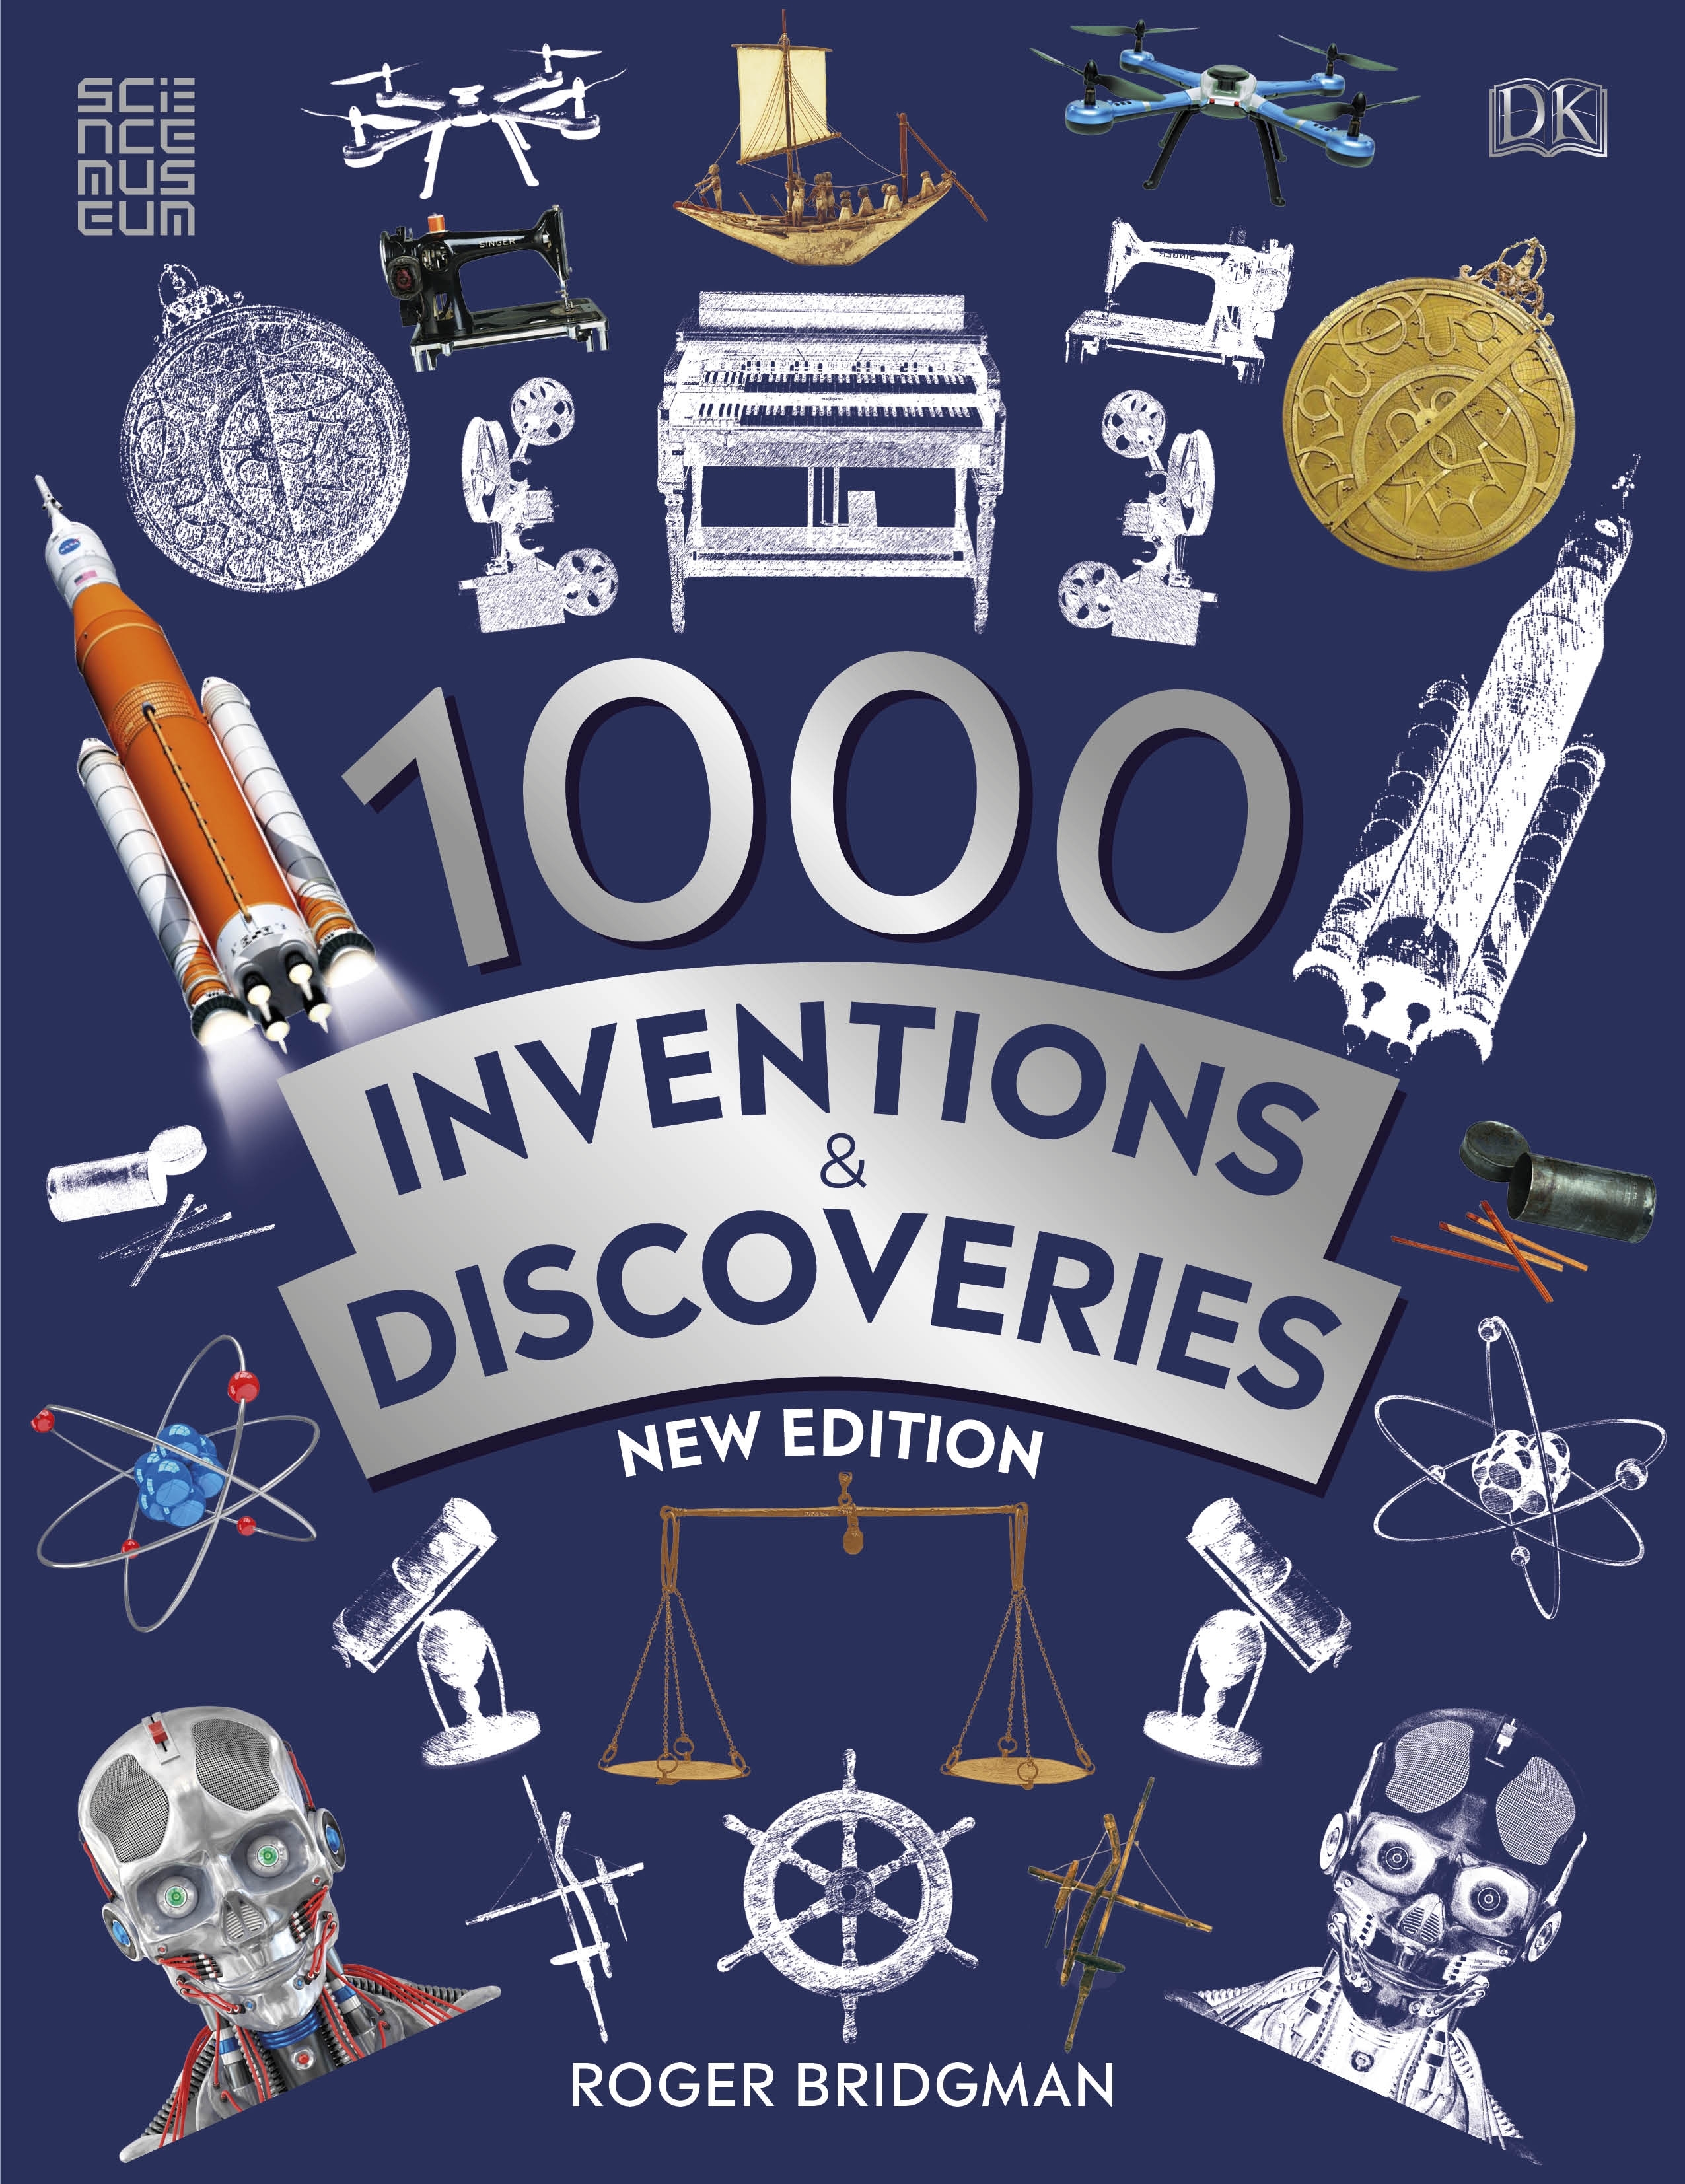 1000 Inventions and Discoveries by Roger Bridgman - Penguin Books New